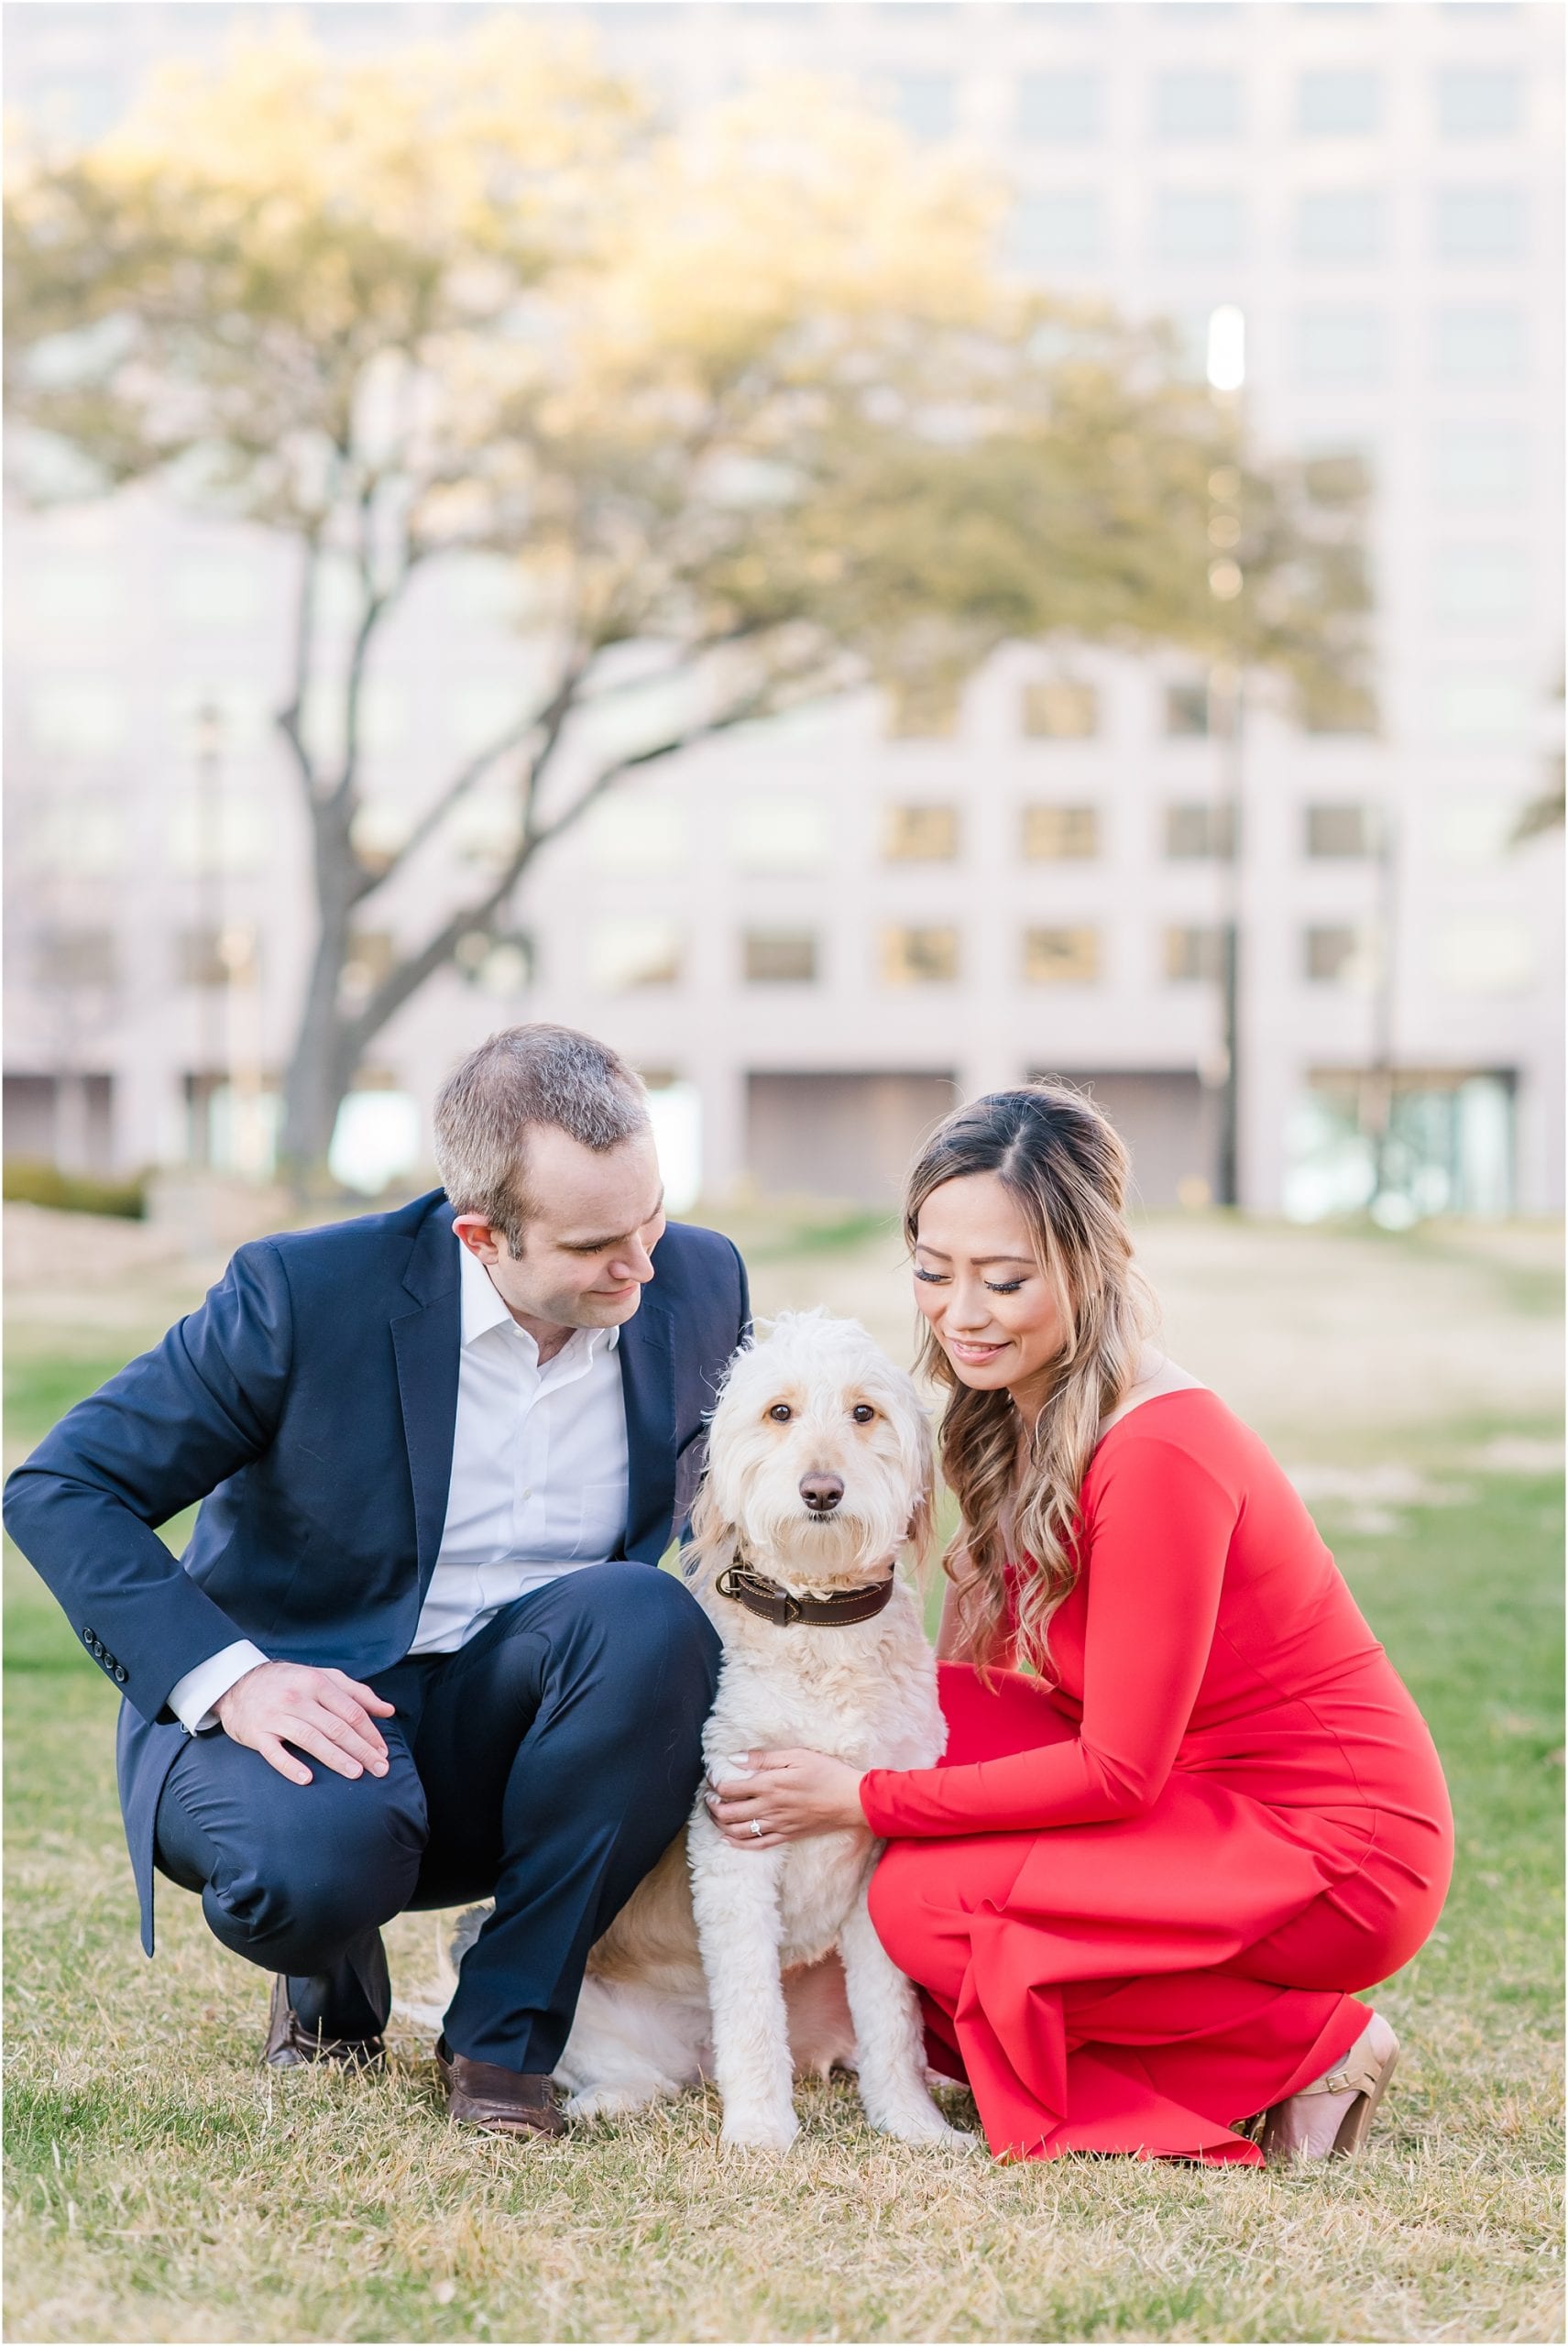 MaggShots Photography, DFW engagement Photographer, Las Colinas Canals engagement Photographer, Las Colinas Canals, Las Colinas engagements, Las Colinas Photographer, Dallas engagement Photographer, fur baby, dog